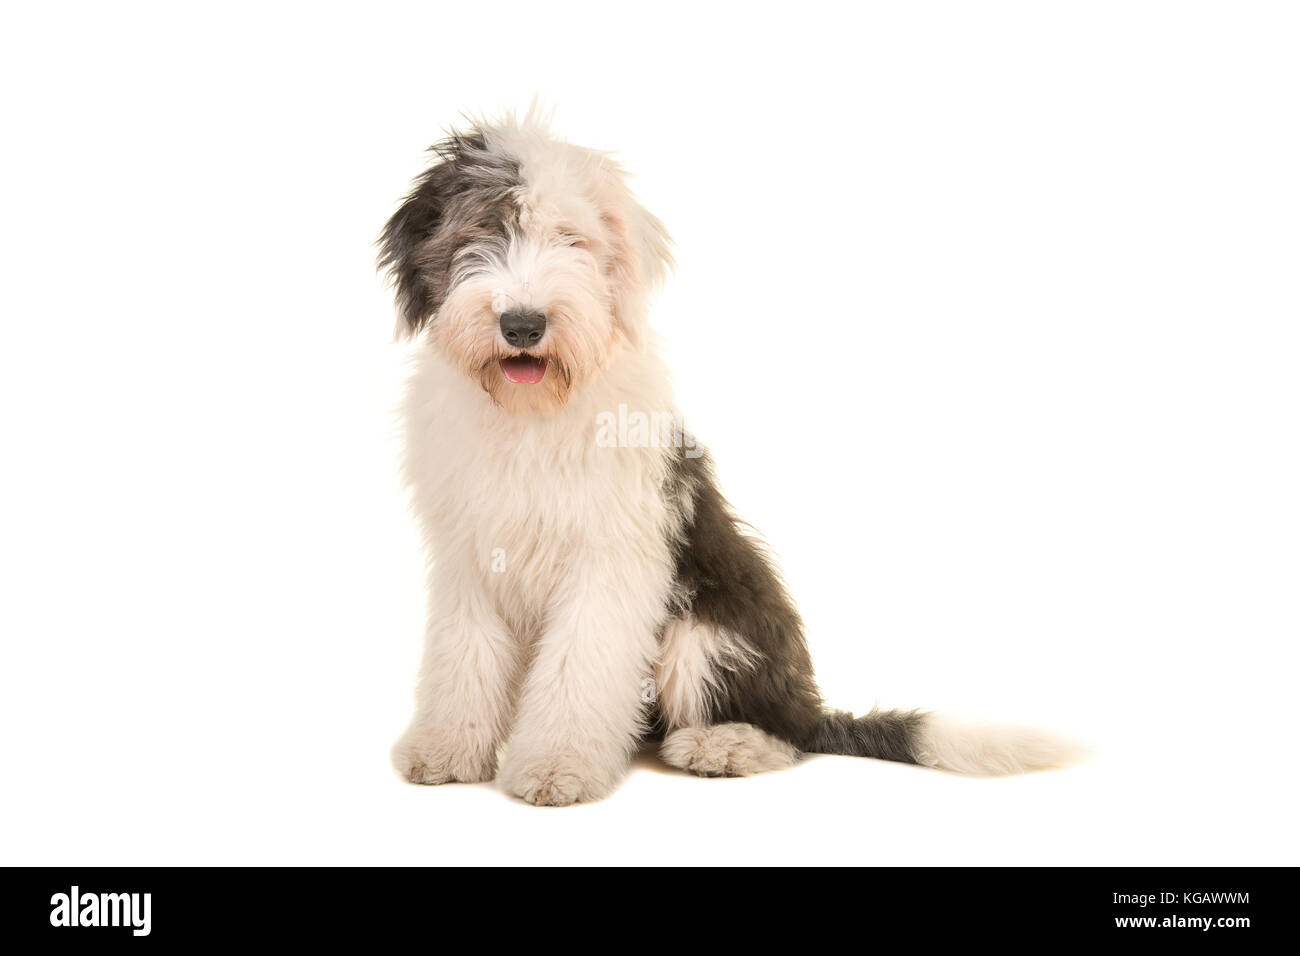 1,500+ Old English Sheep Dog Stock Photos, Pictures & Royalty-Free